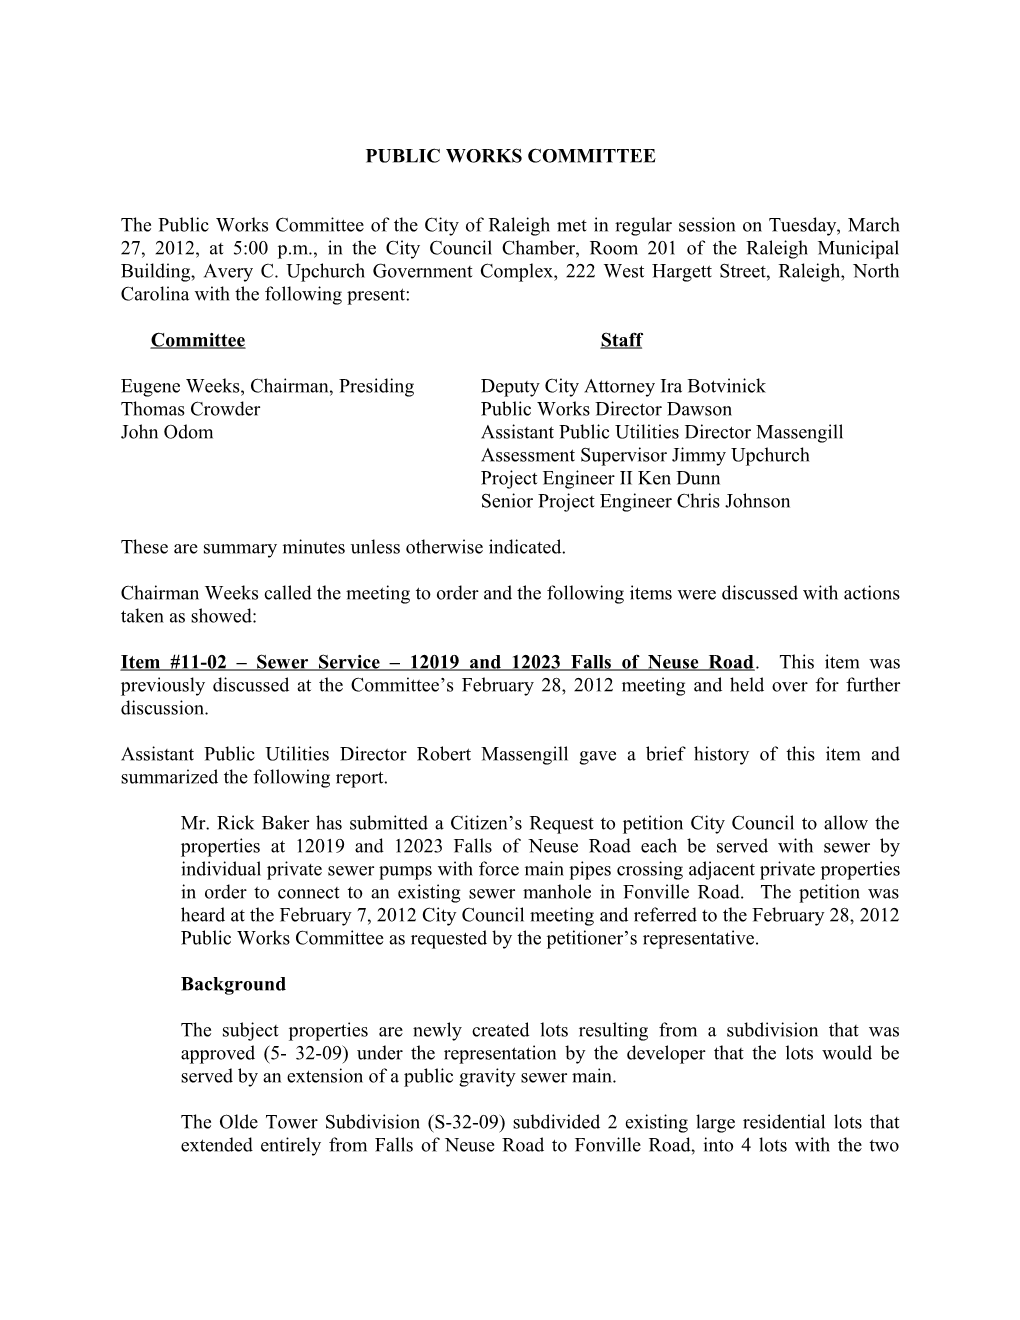 Public Works Committee Minutes - 03/27/2012